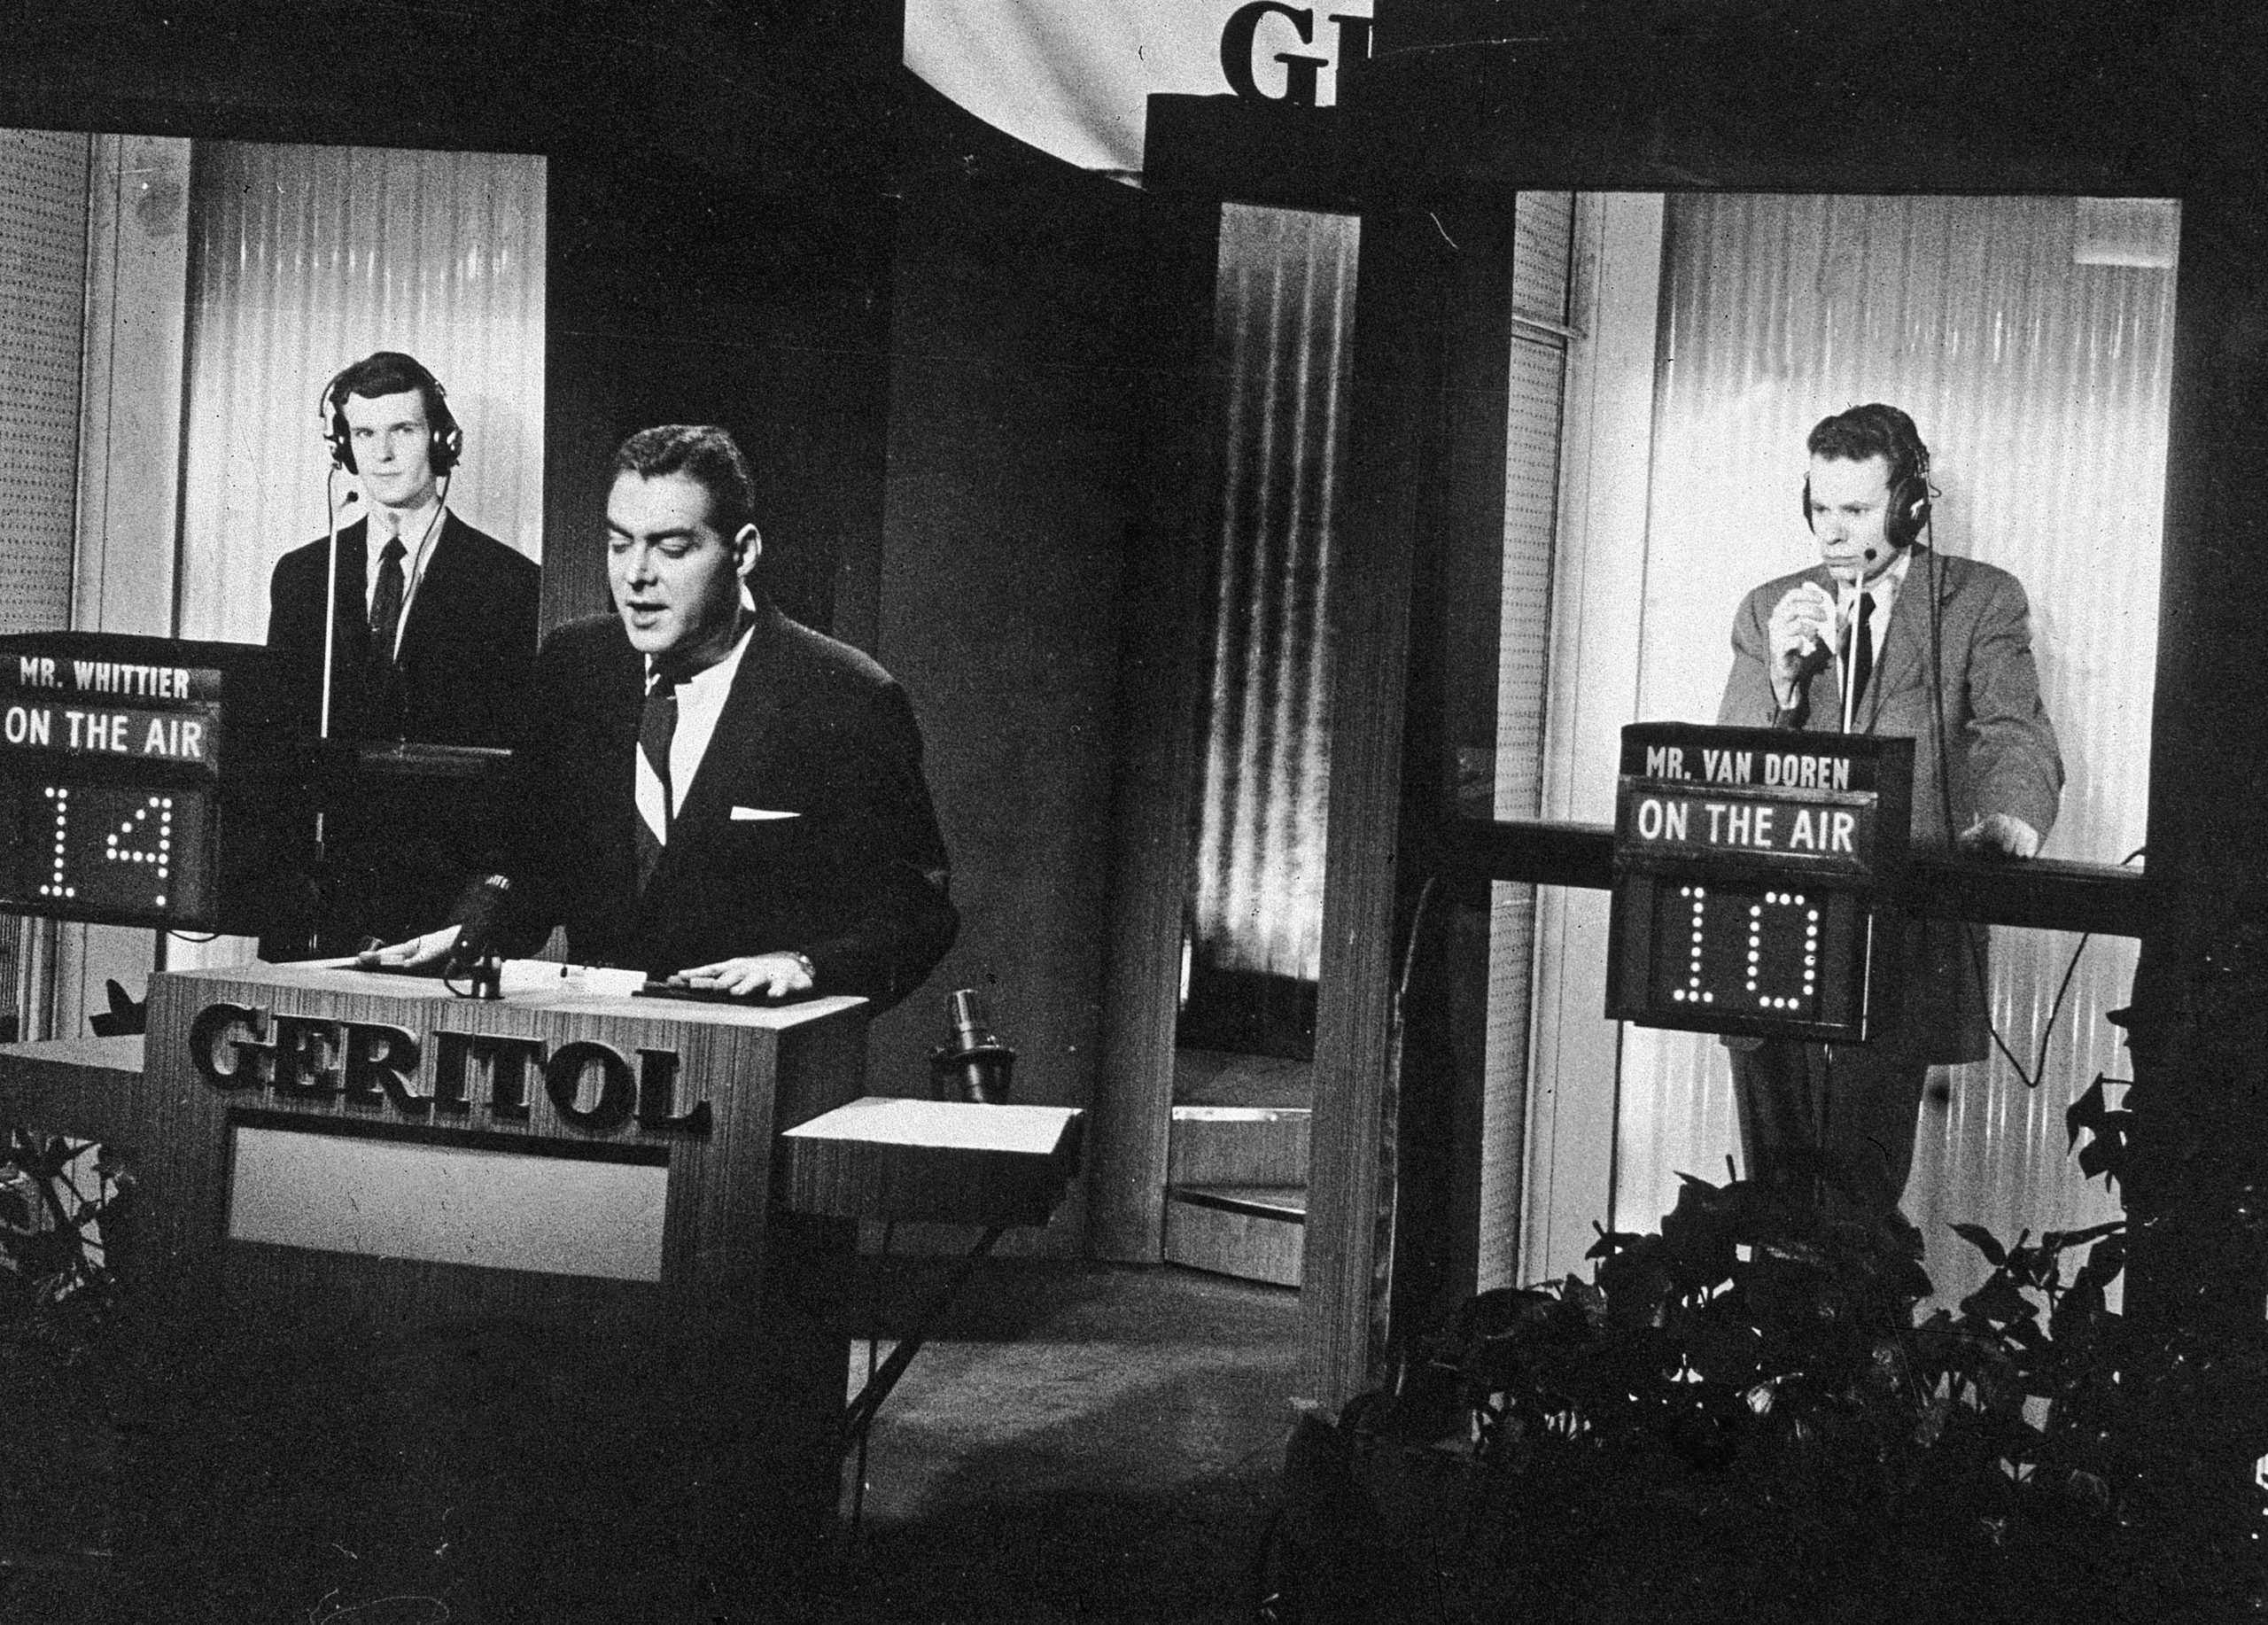 1950 Game Show Scandal The Only Game Show Resulted From A Cheating Scandal!